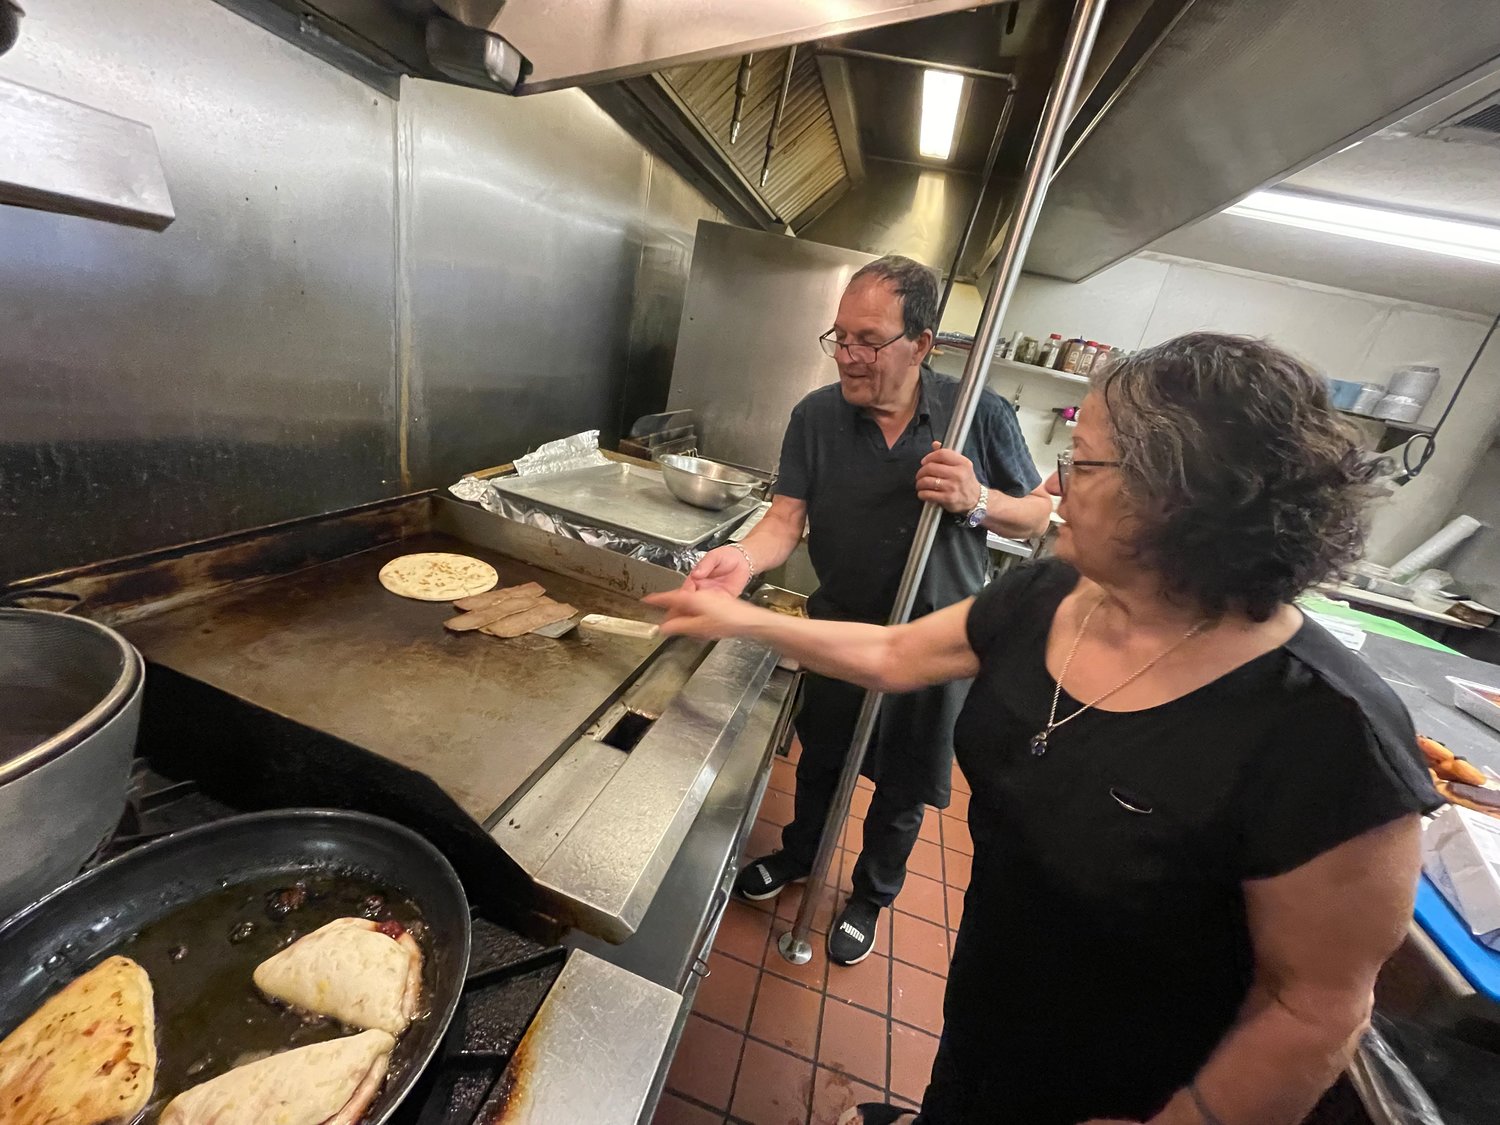 Stefano Mangafakis,left, helps his wife Despina Mangafakis, right, grill some beef for gyros. Their Ridgeland restaurant, YiaYia’s Greek Kitchen, was recently honored with a culinary award from the country of Greece for their authenic foods.